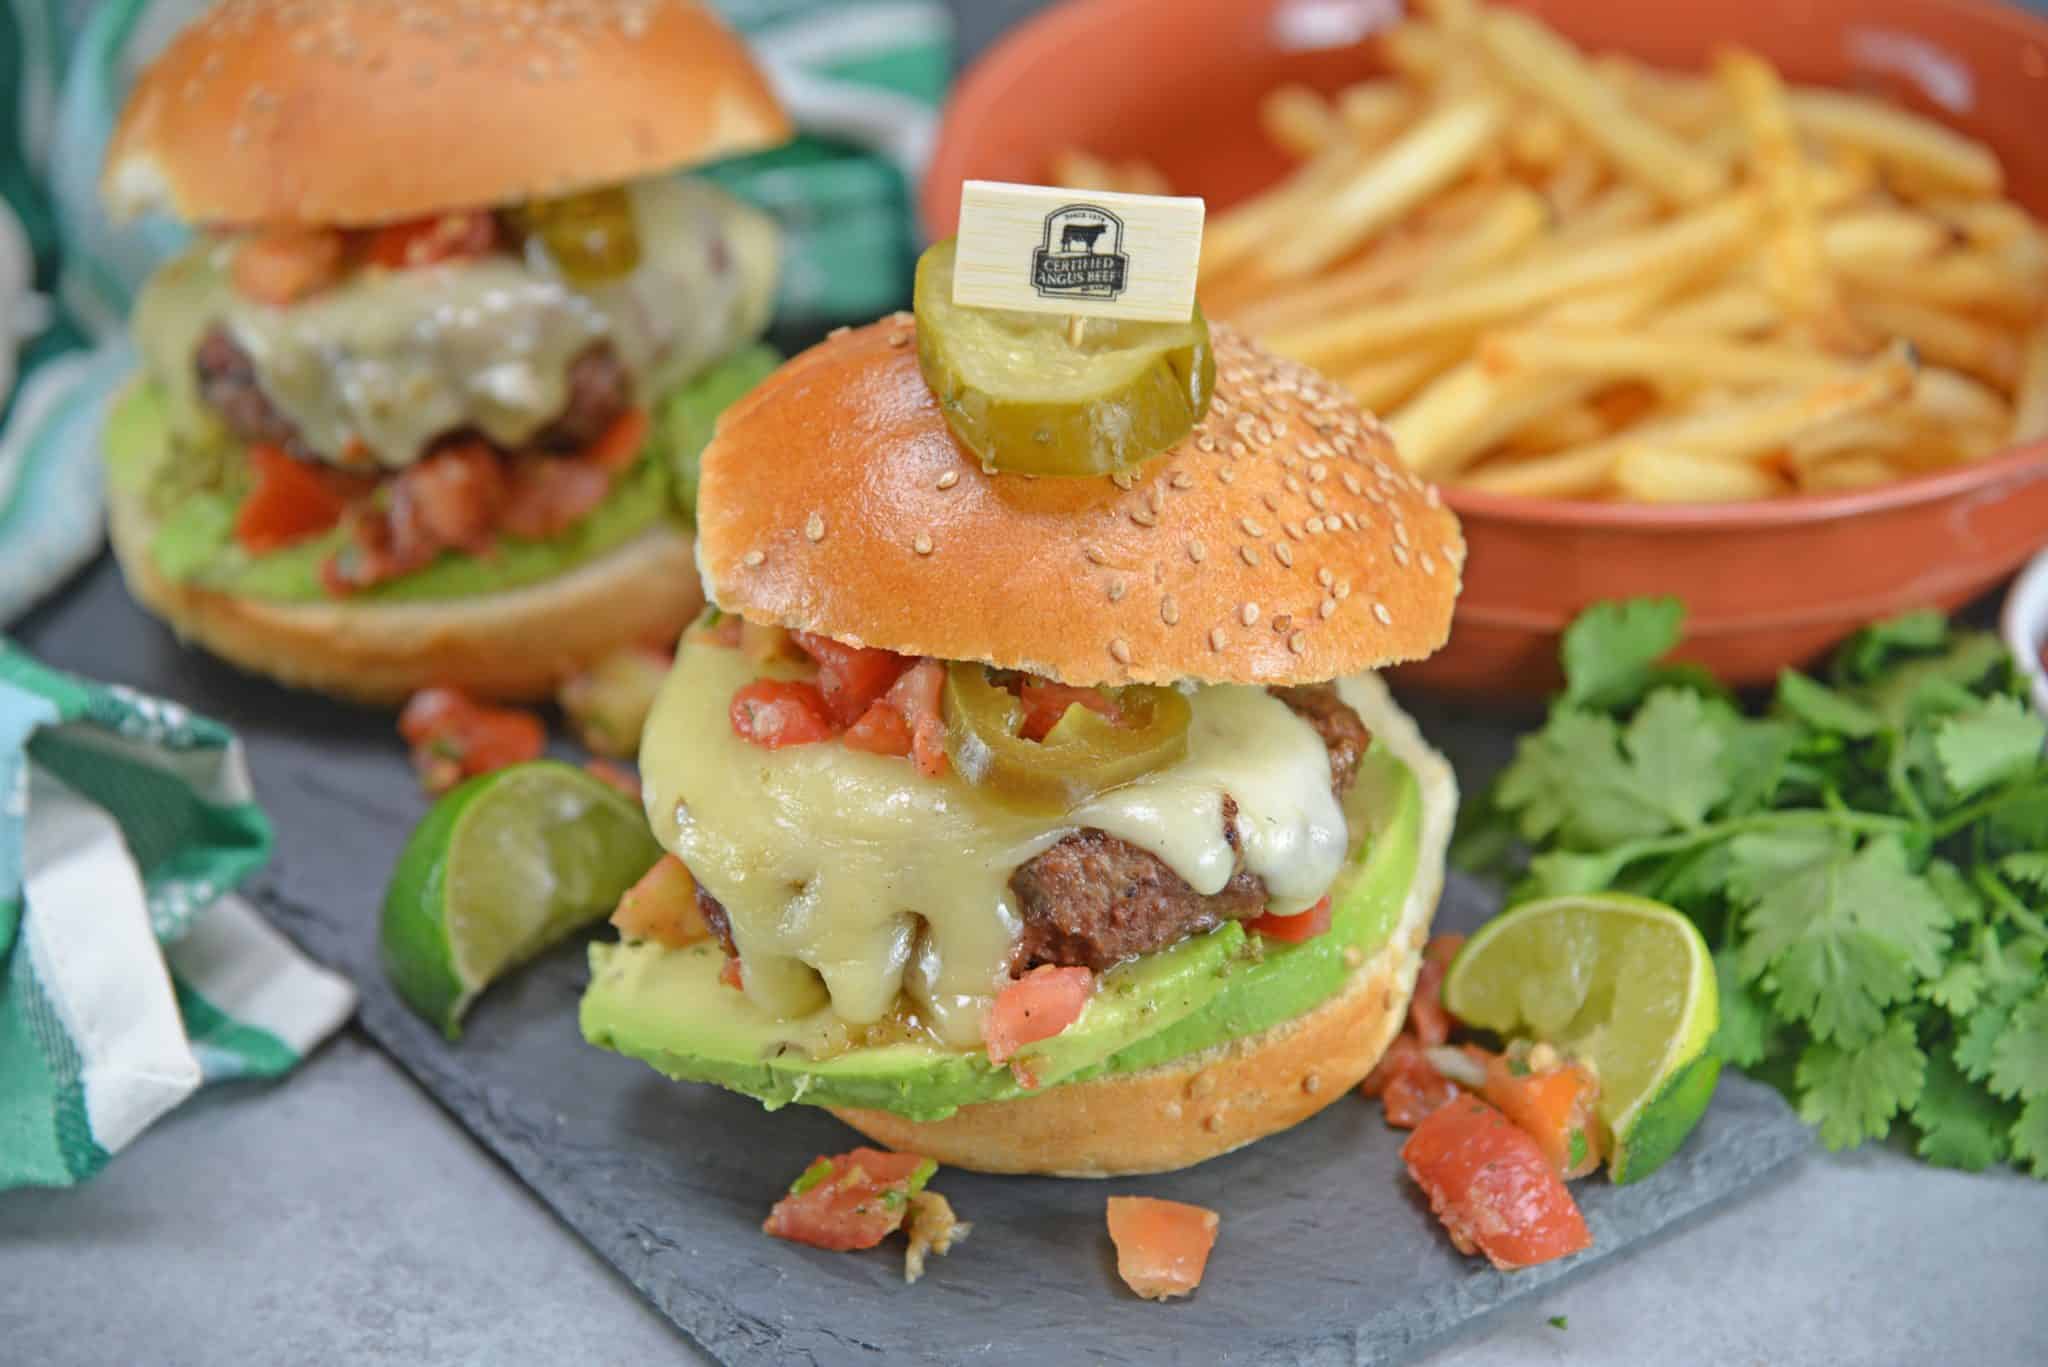 Taco Burgers are a spicy mix of tacos and burgers! Topped with pico de gallo, avocado slices, jalapenos, pepper jack cheese and cool sour cream.